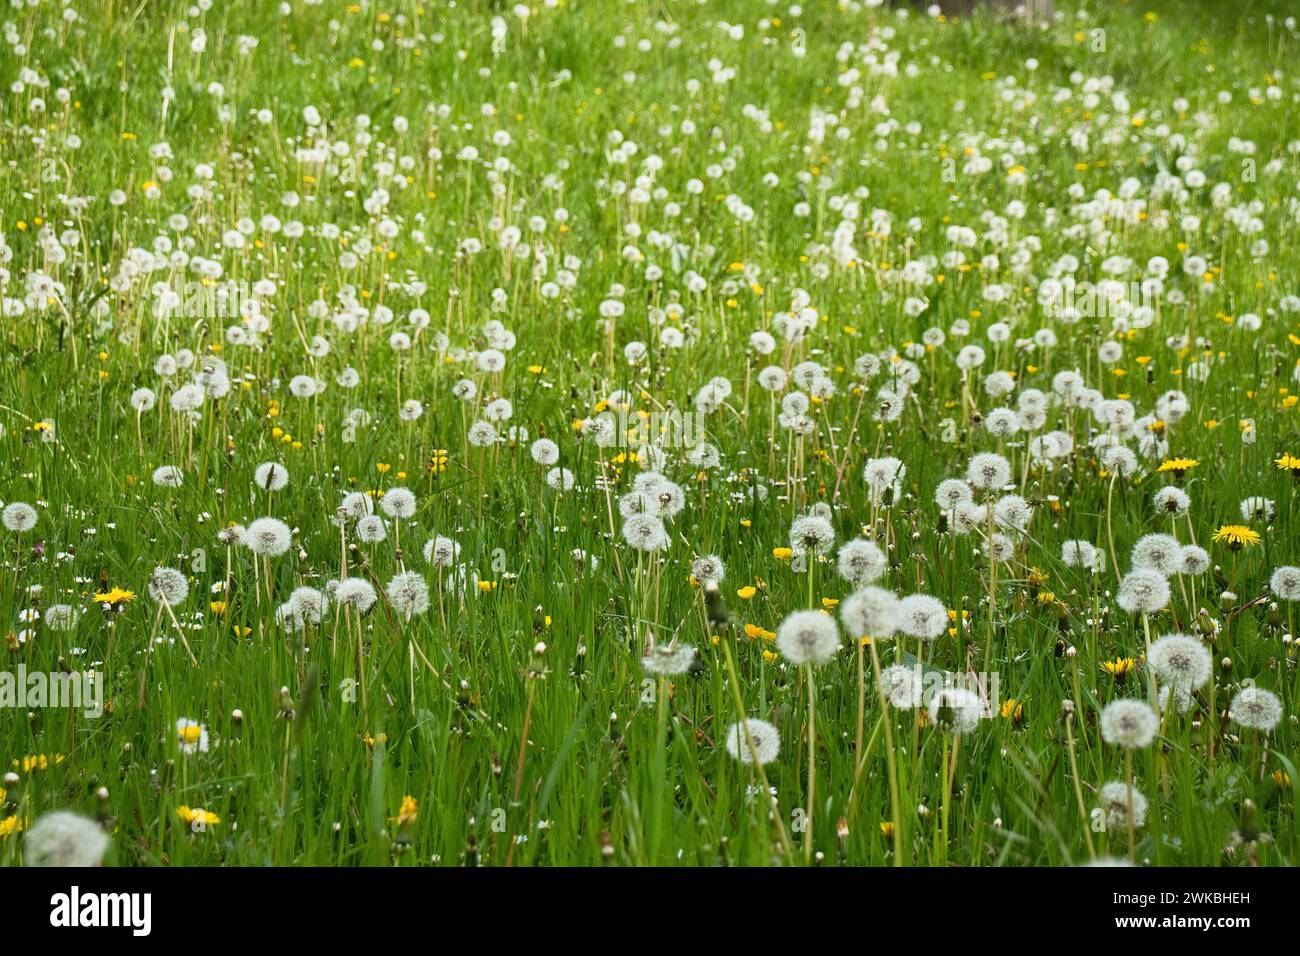 Field of green grass full of dandelions gone to seed on a spring day in Rhineland Palatinate, Germany. Stock Photo